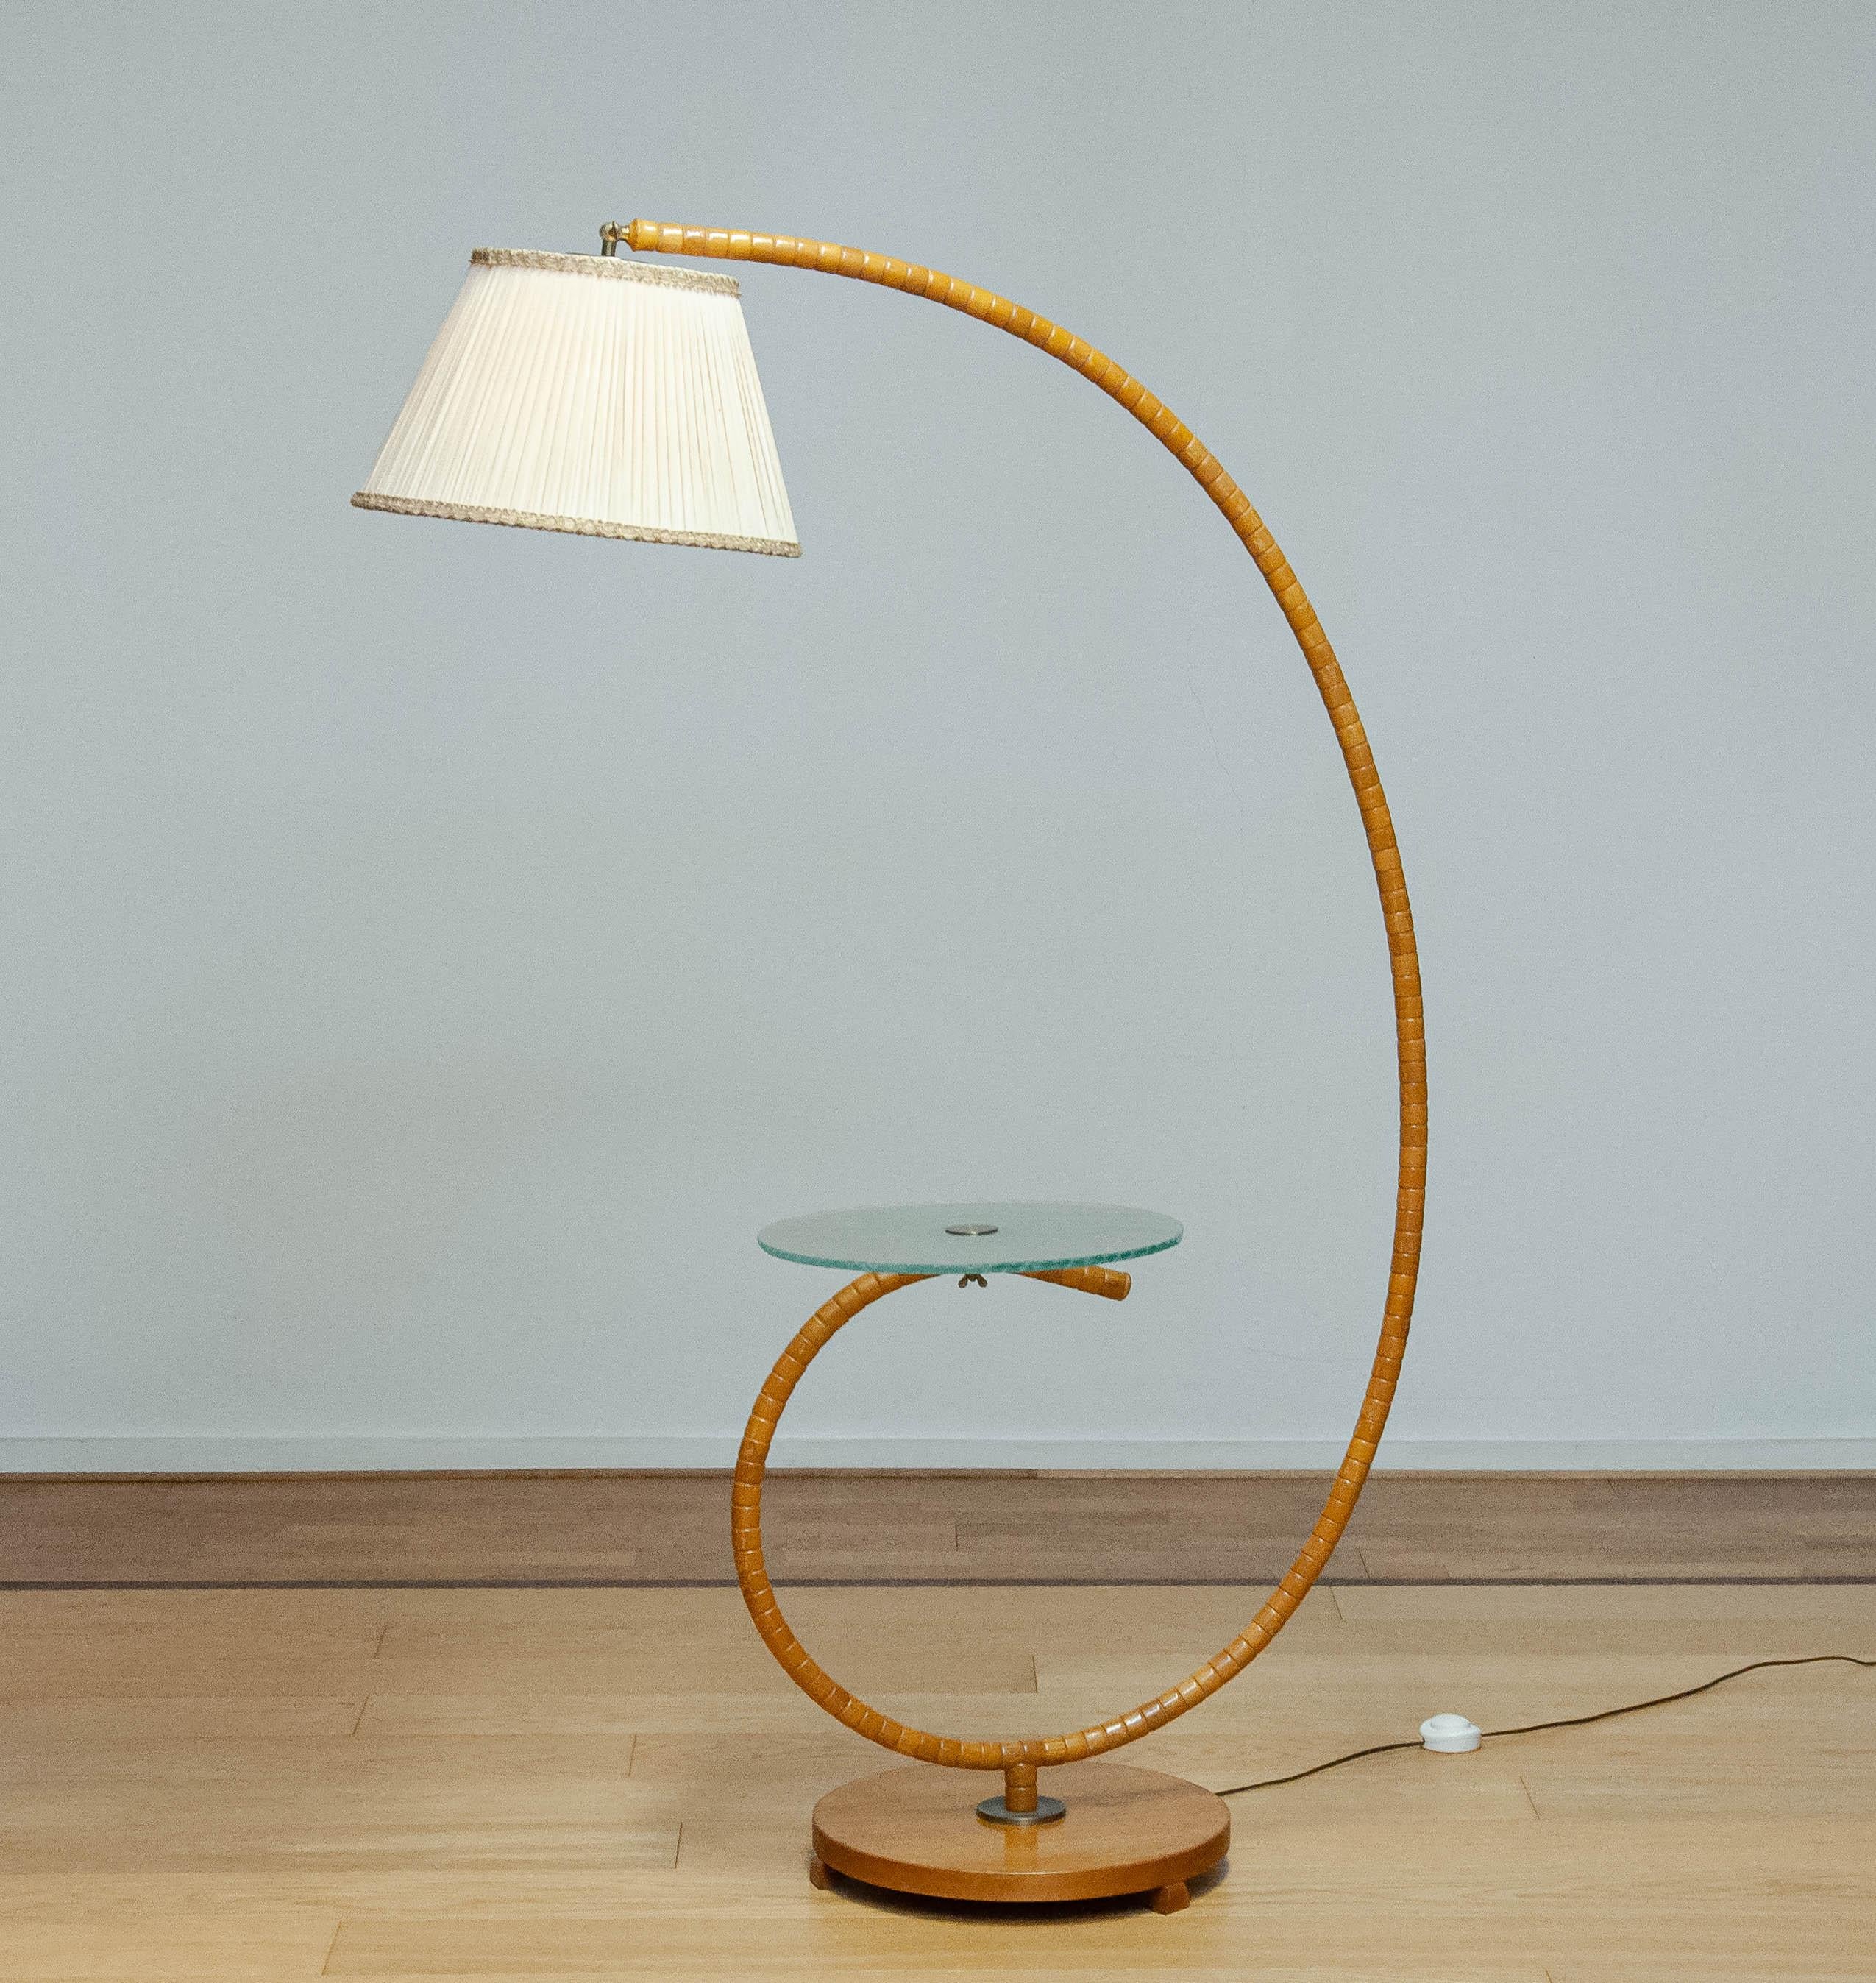 Absolutely beautiful and very rare Art Nouveau floor lamp made in the 1940s in Sweden by IWO in Mariestad.
The lamp is made of Elm wood combined with a art glass table. The art glass table 
top has engravings on the bottom, difficult to photograph